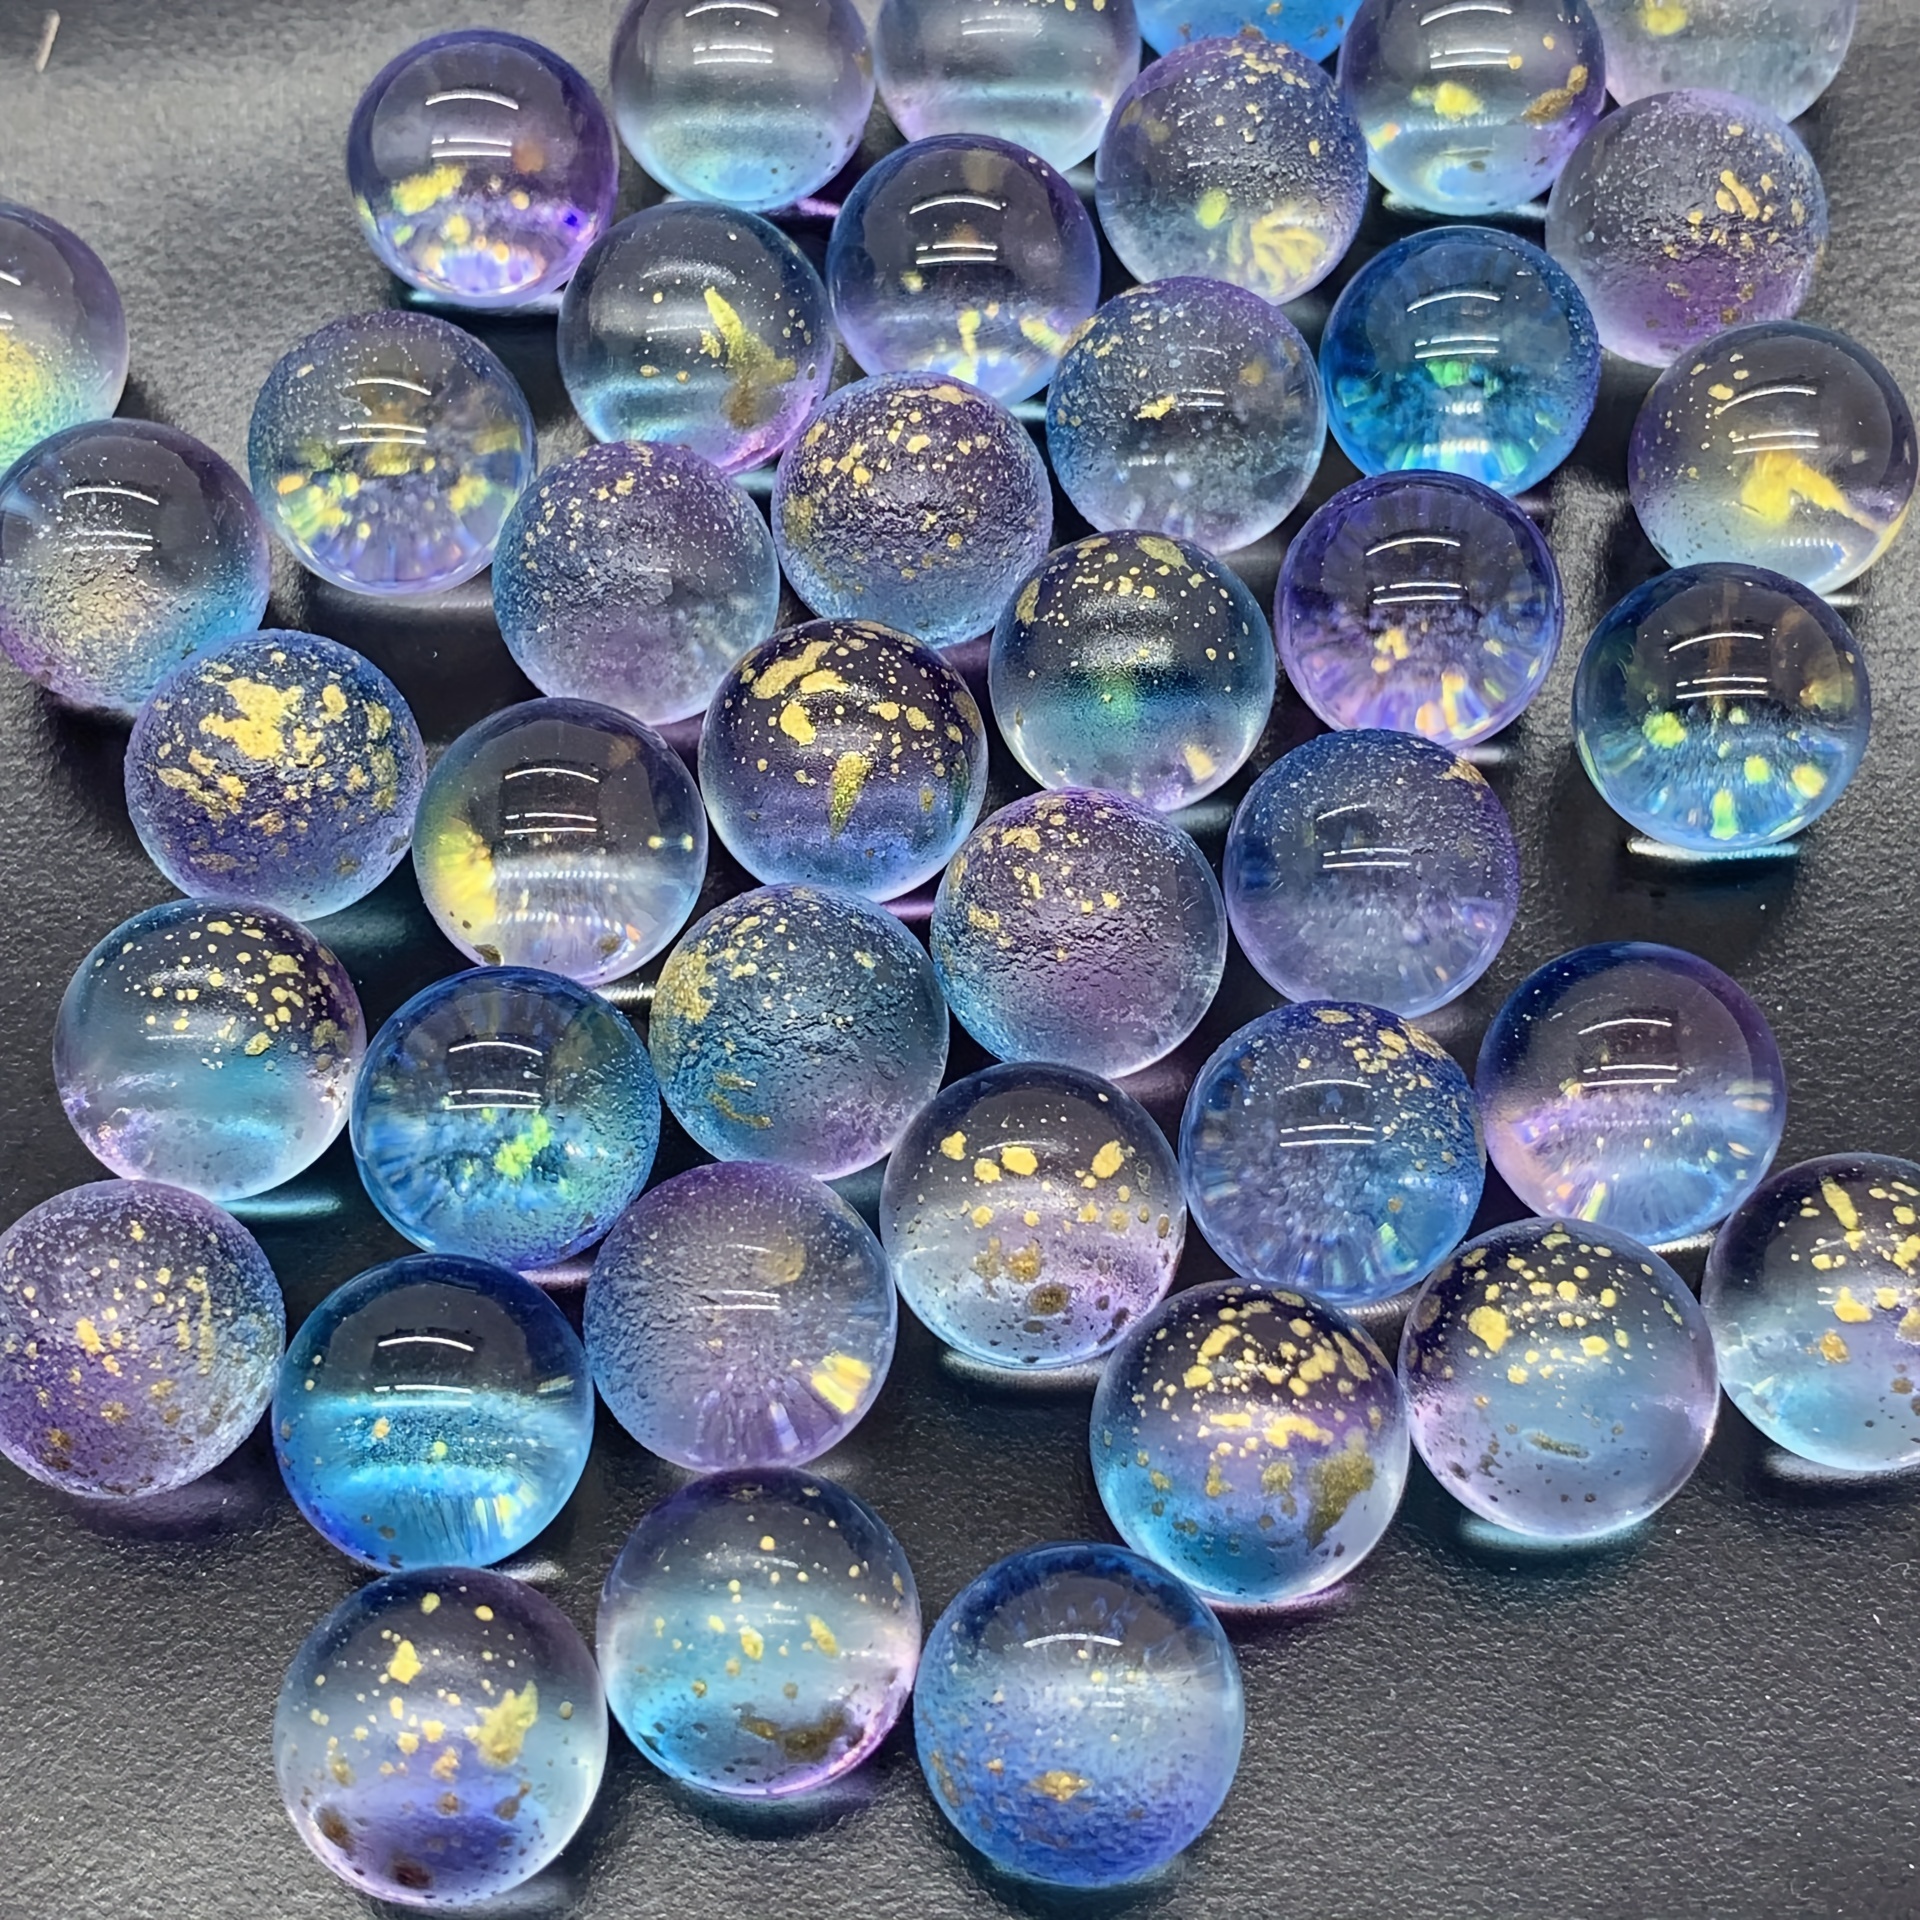 New for 2022 22mm Handmade Art Glass Marbles Set of 12: 4 Riptide, 3  Pollination, 3 Doodles, 2 Insignia 1 of Each New Color and Design. 